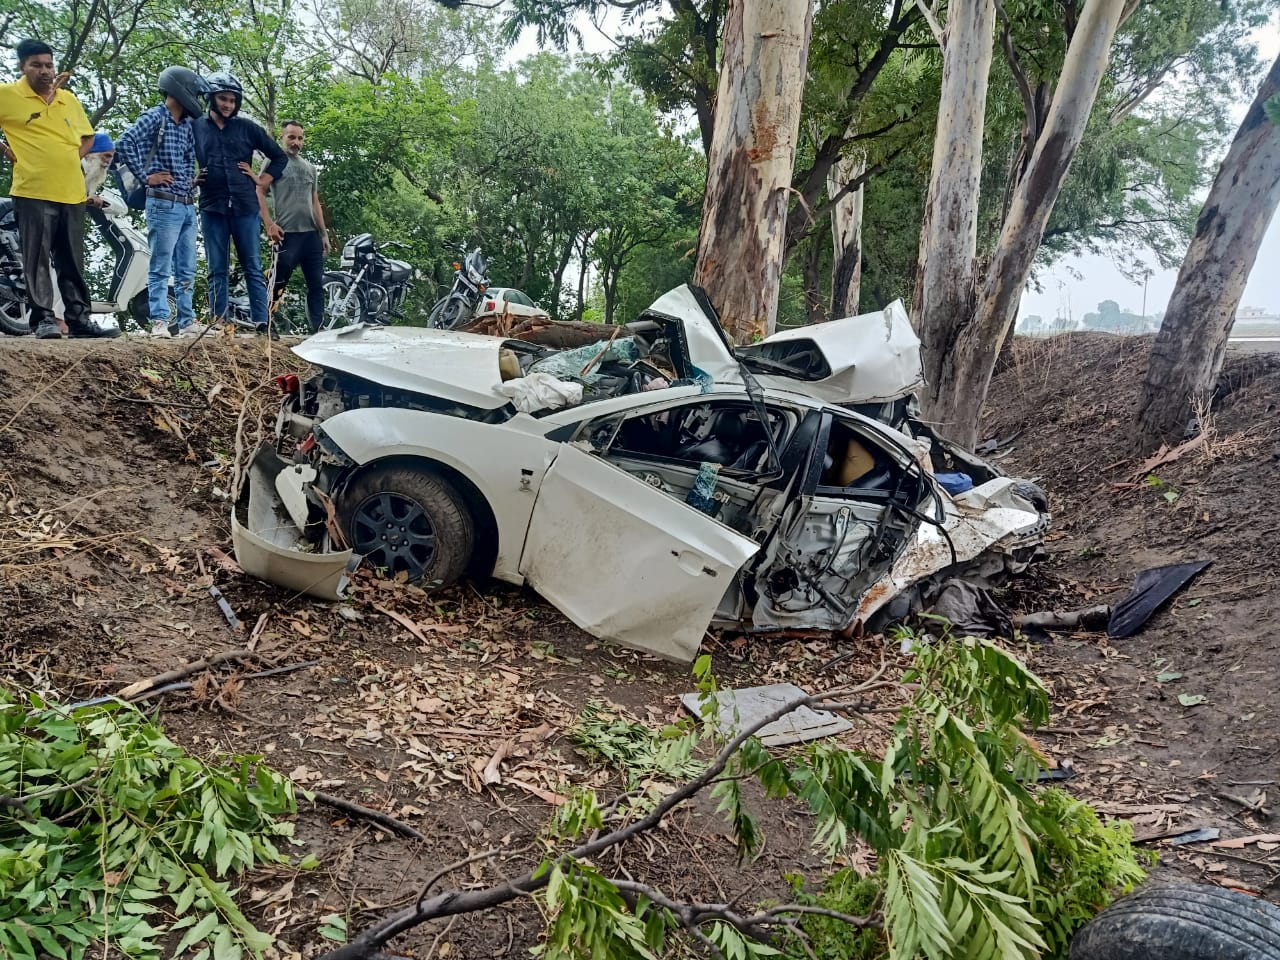 Miraculous escape for youth as car rams into trees near Majri village